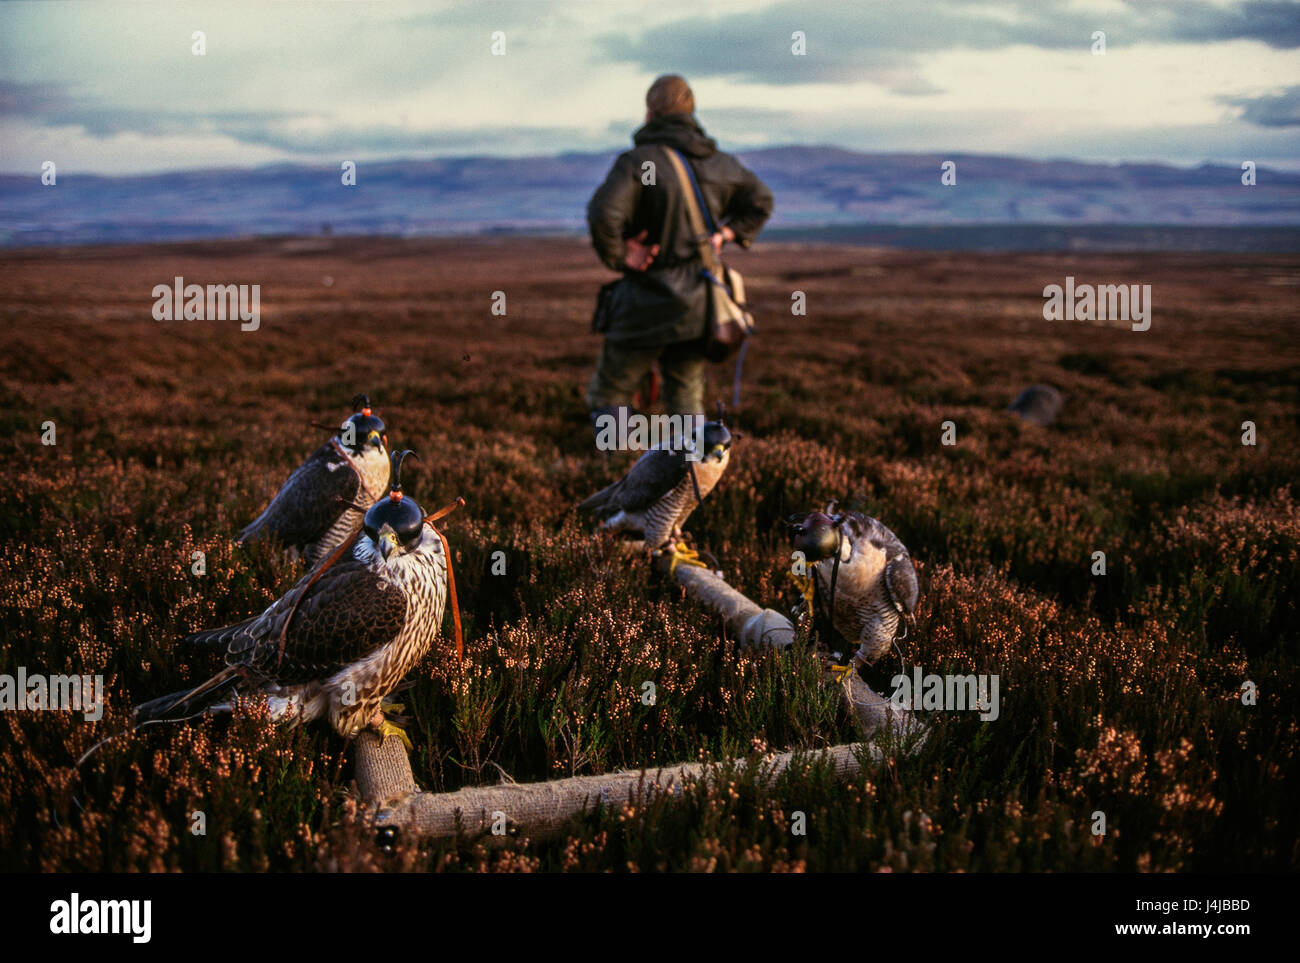 Two pair of falcons on a falconer's purpose made frame wait in moorland heather pre flight, Gleneagles, Scotland. Stock Photo